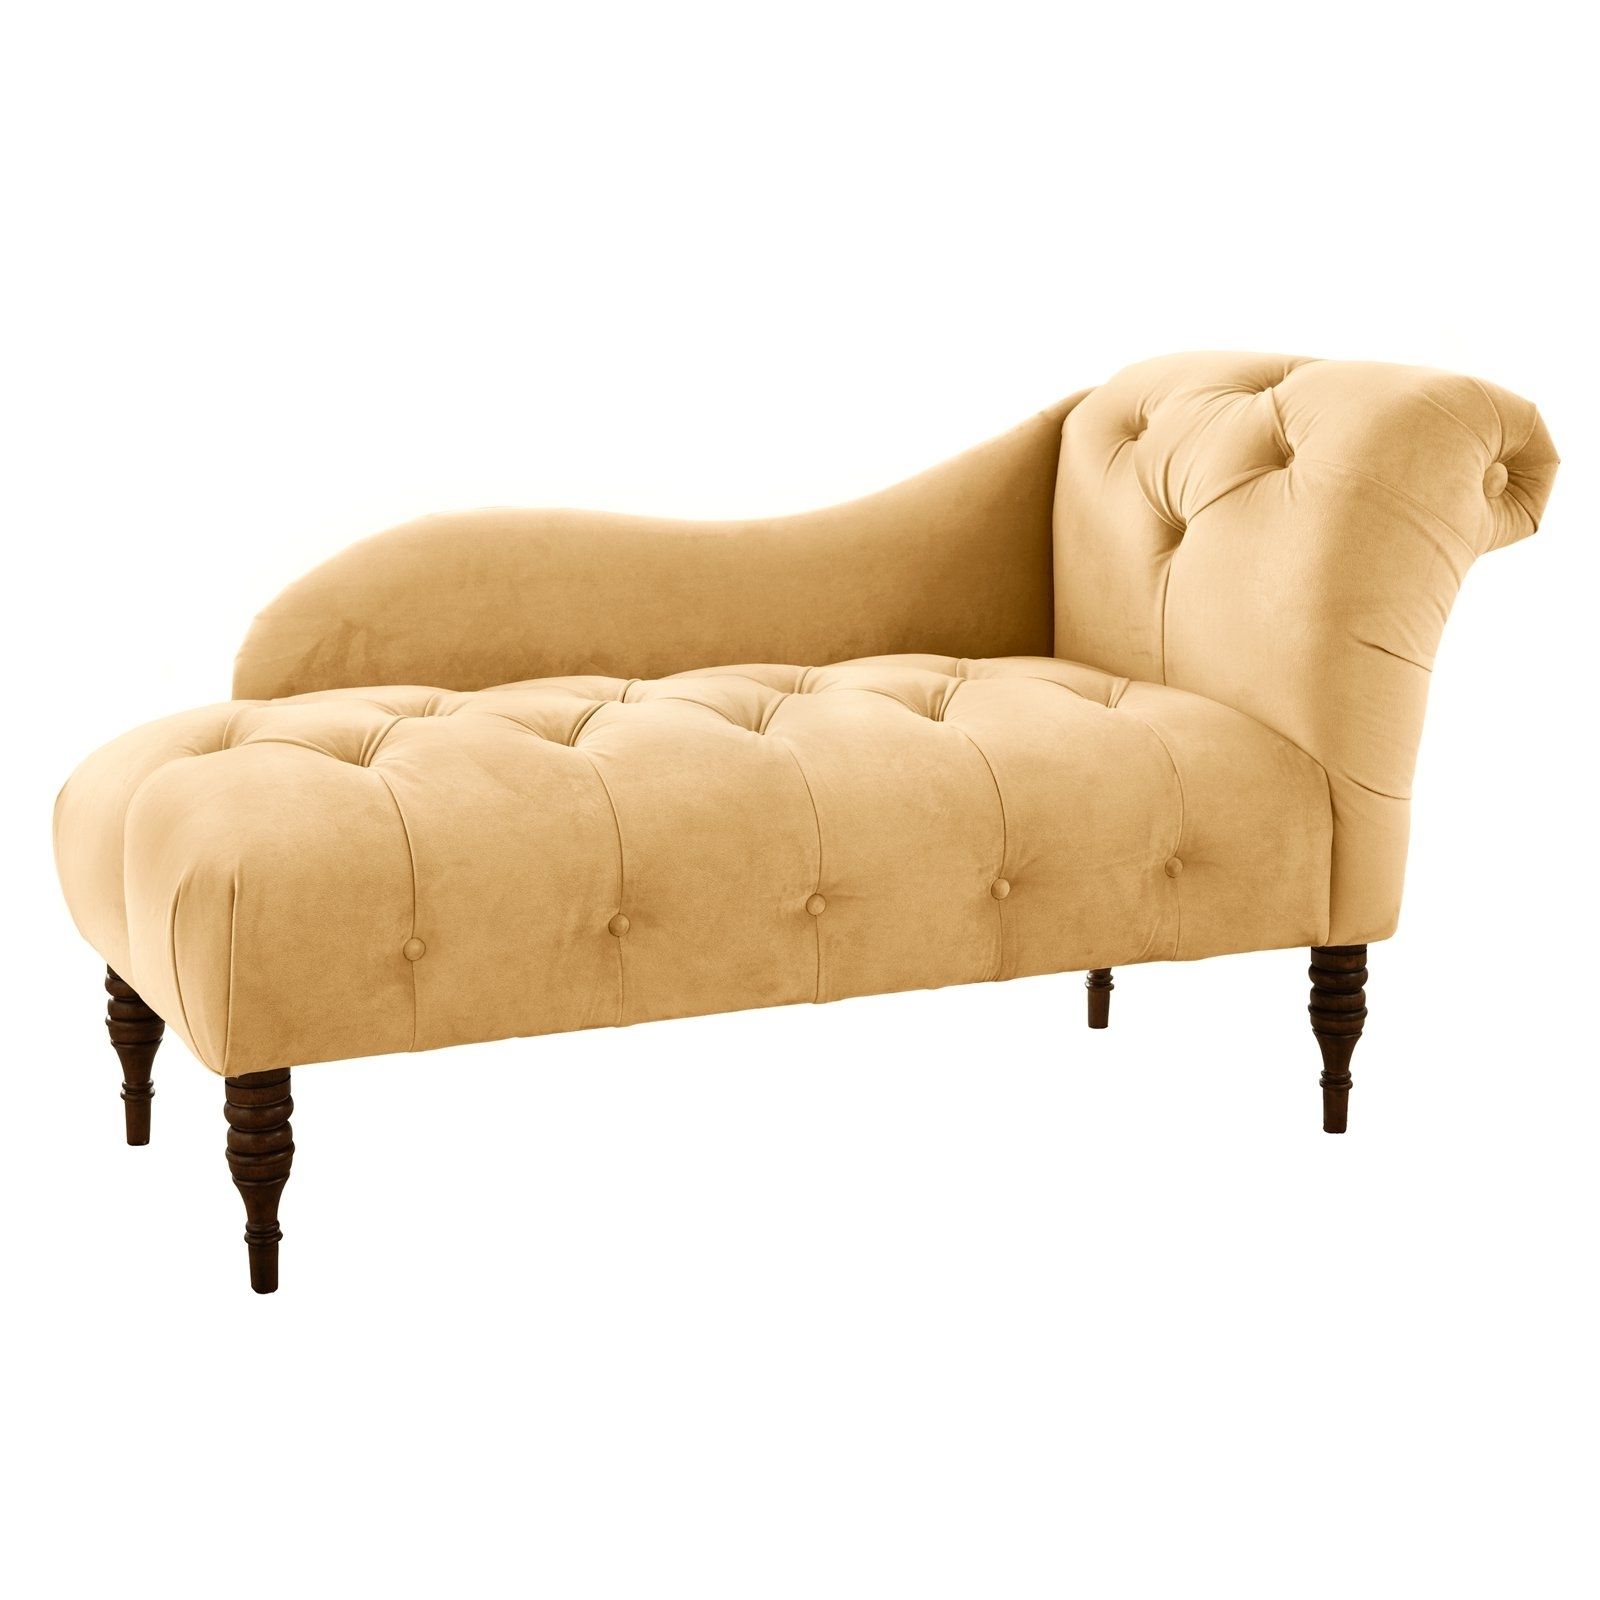 Most Popular Tufted Chaise Lounges Intended For Madison Tufted Chaise Lounge (View 1 of 15)